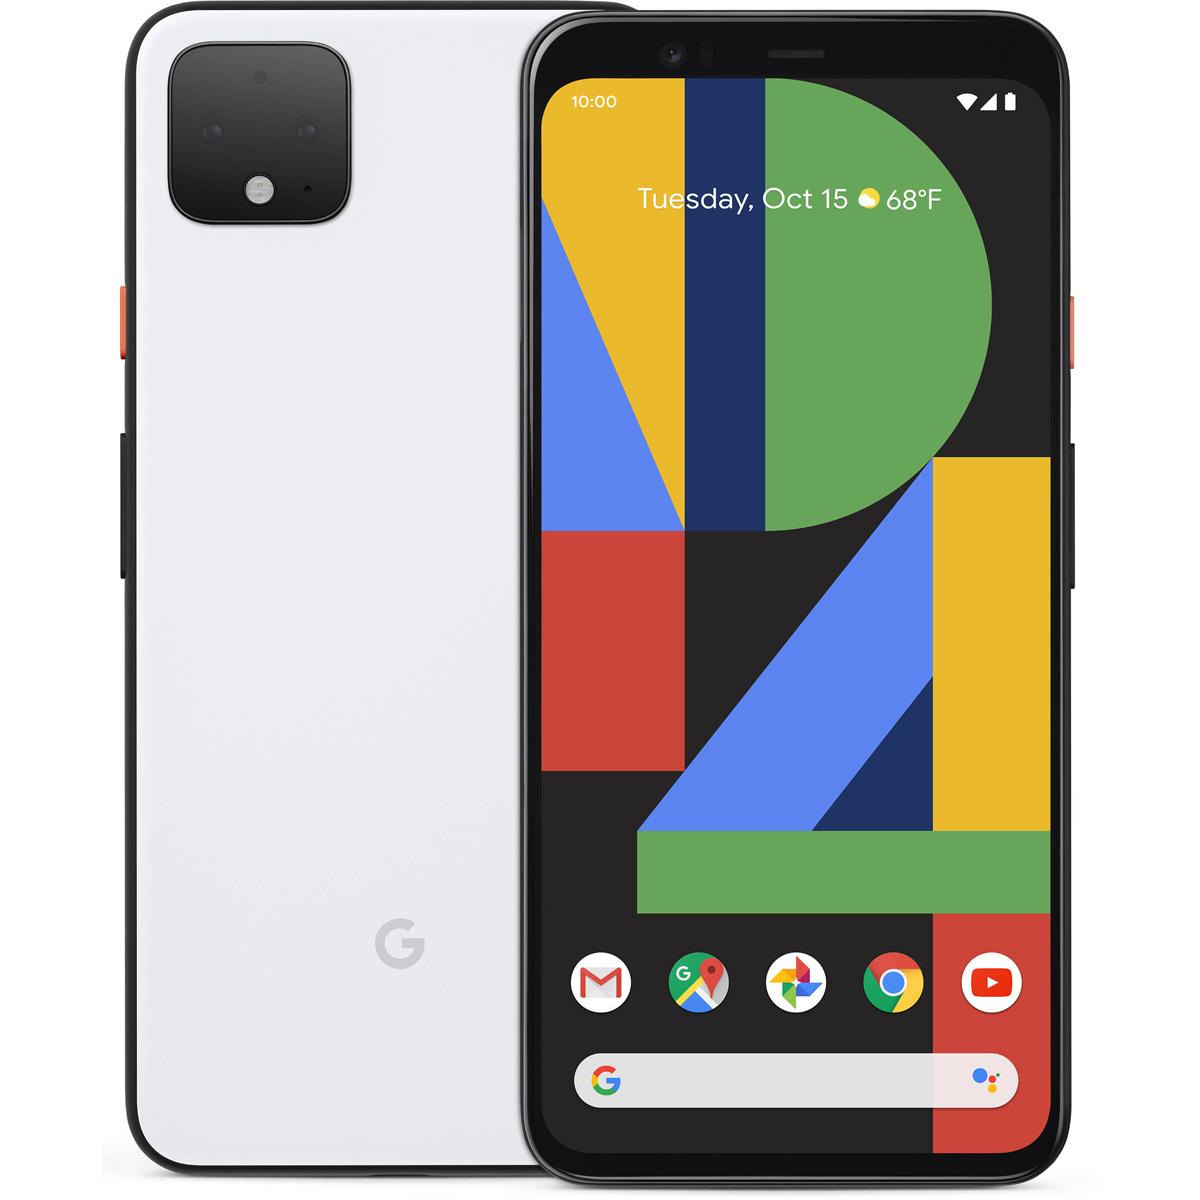 Google Pixel 4 64GB Unlocked Smartphone for $249.99 Shipped